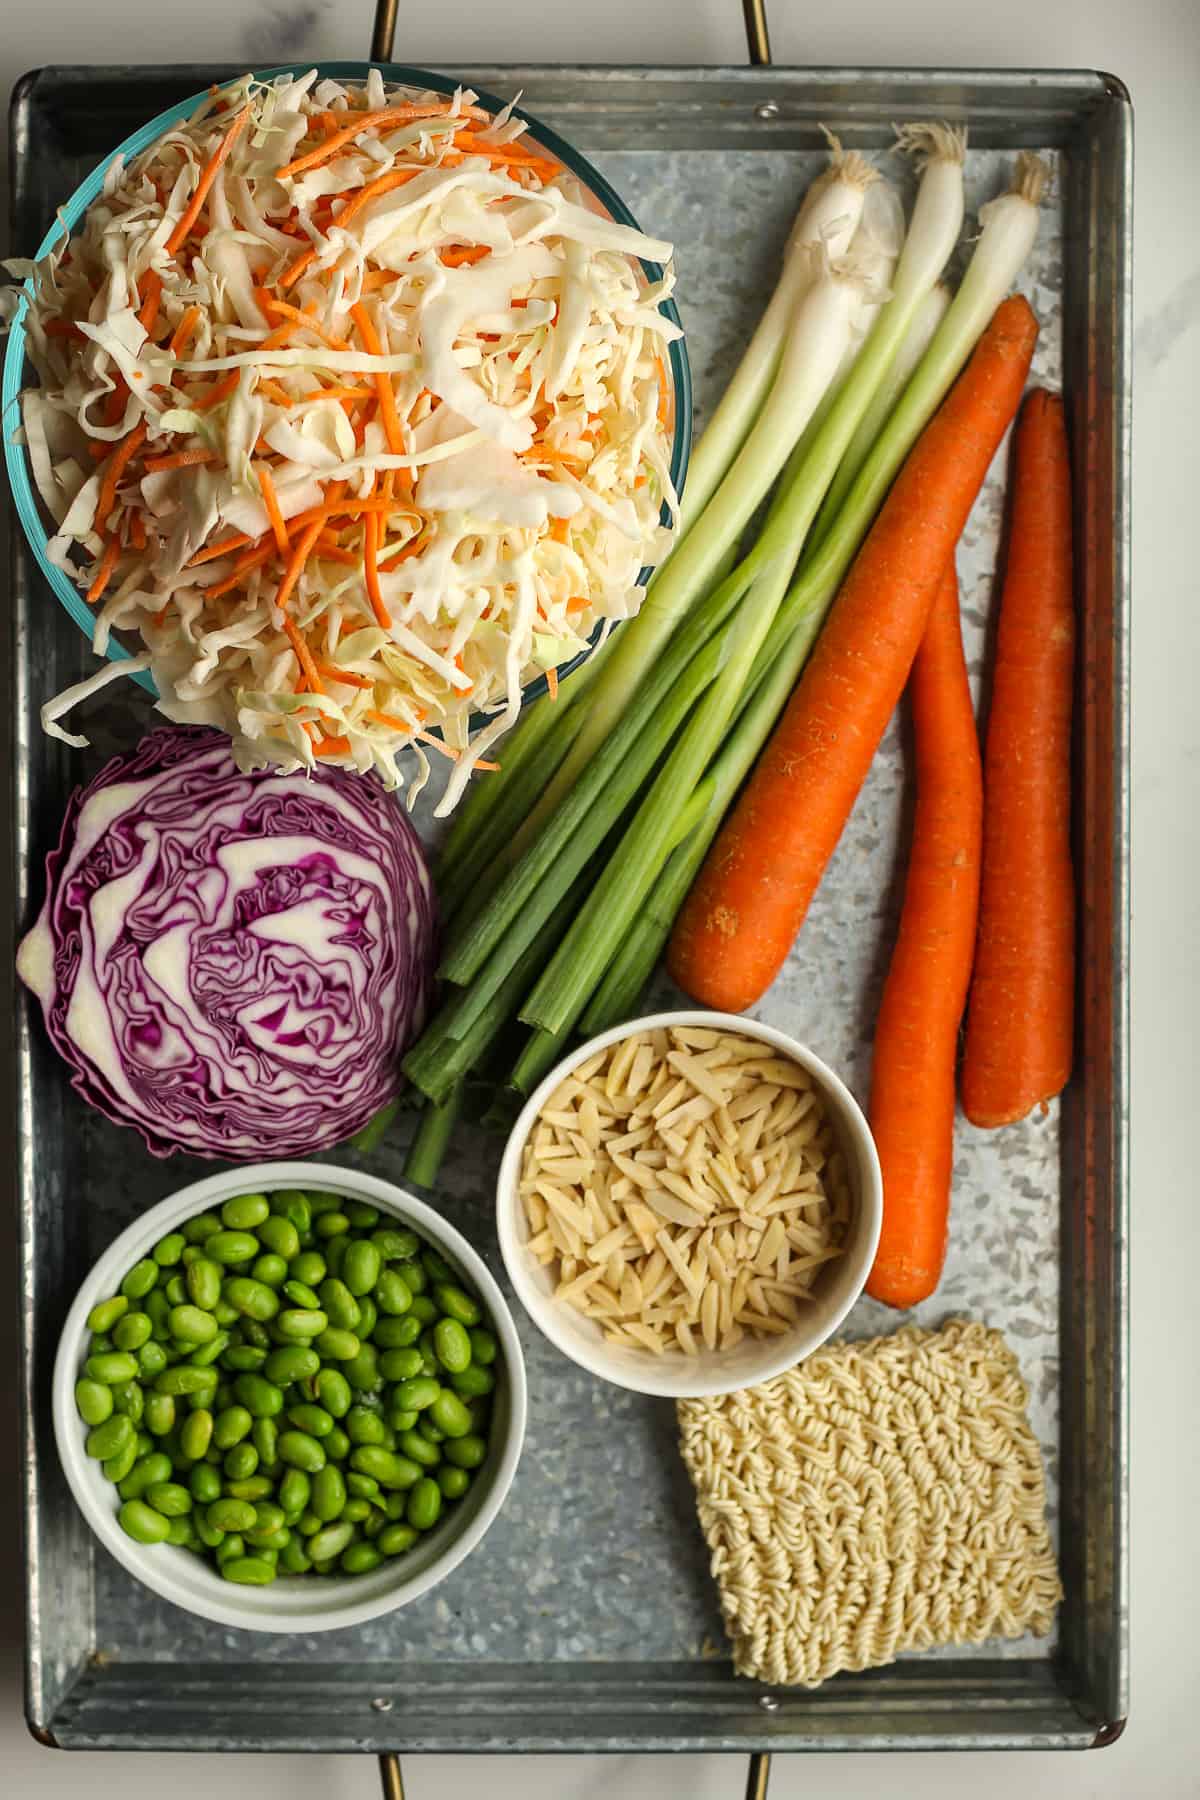 A tray of the cabbage salad ingredients.